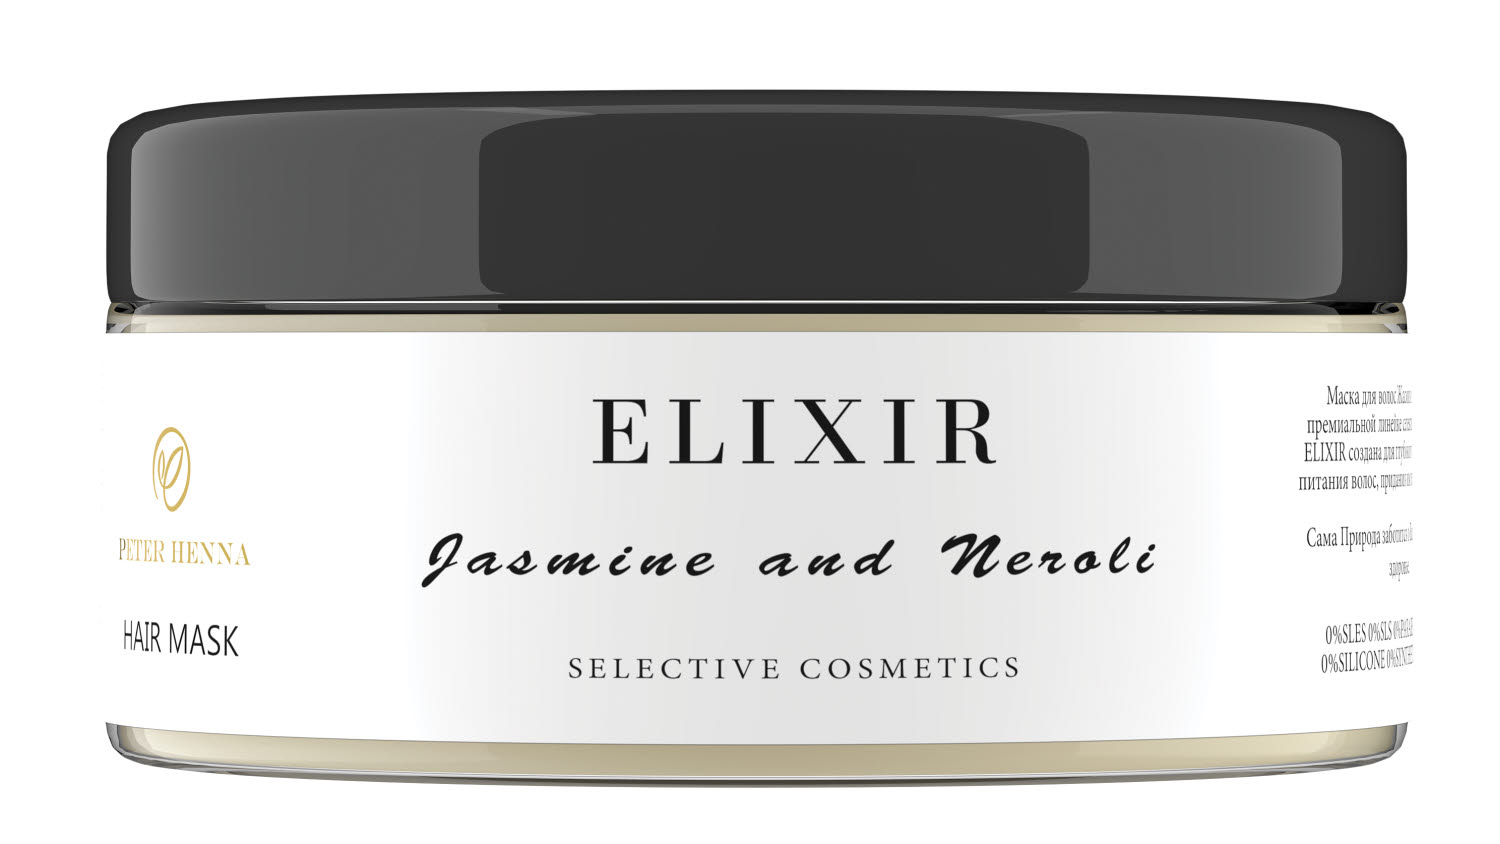 elixir by peter henna container